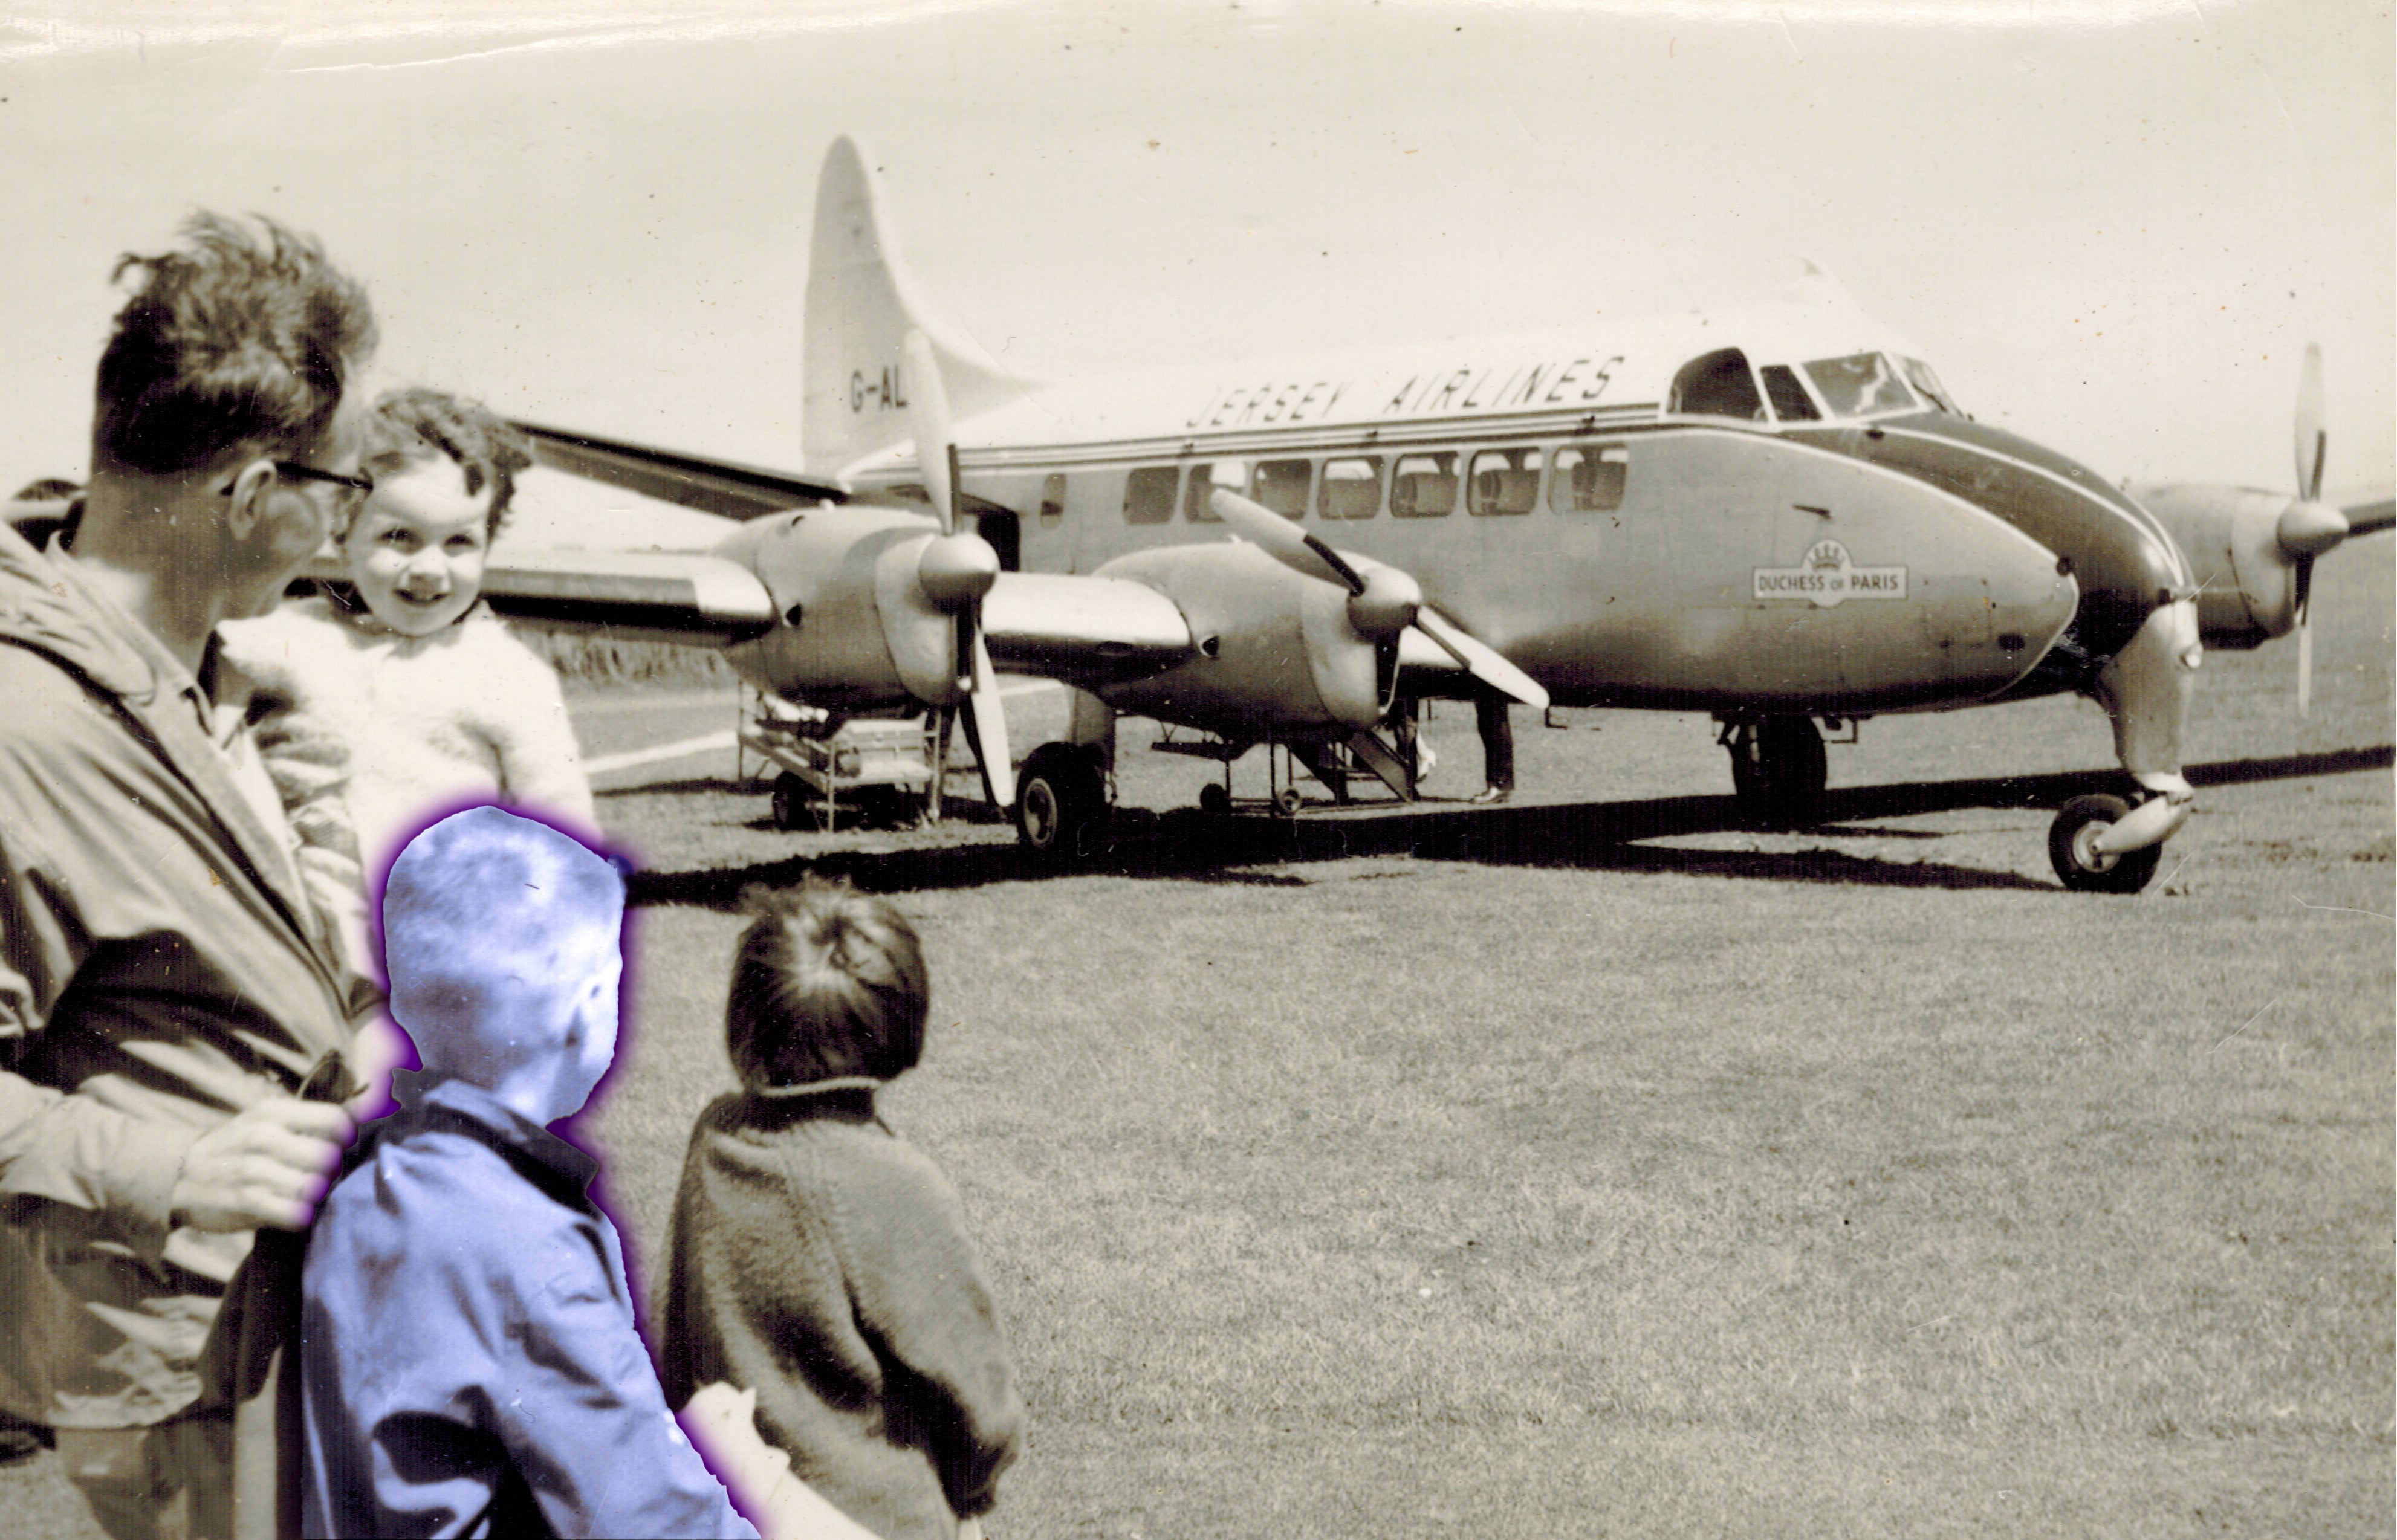 Robert Jan van Pelt, his siblings and father standing in front of an airplane on Alderney in 1961